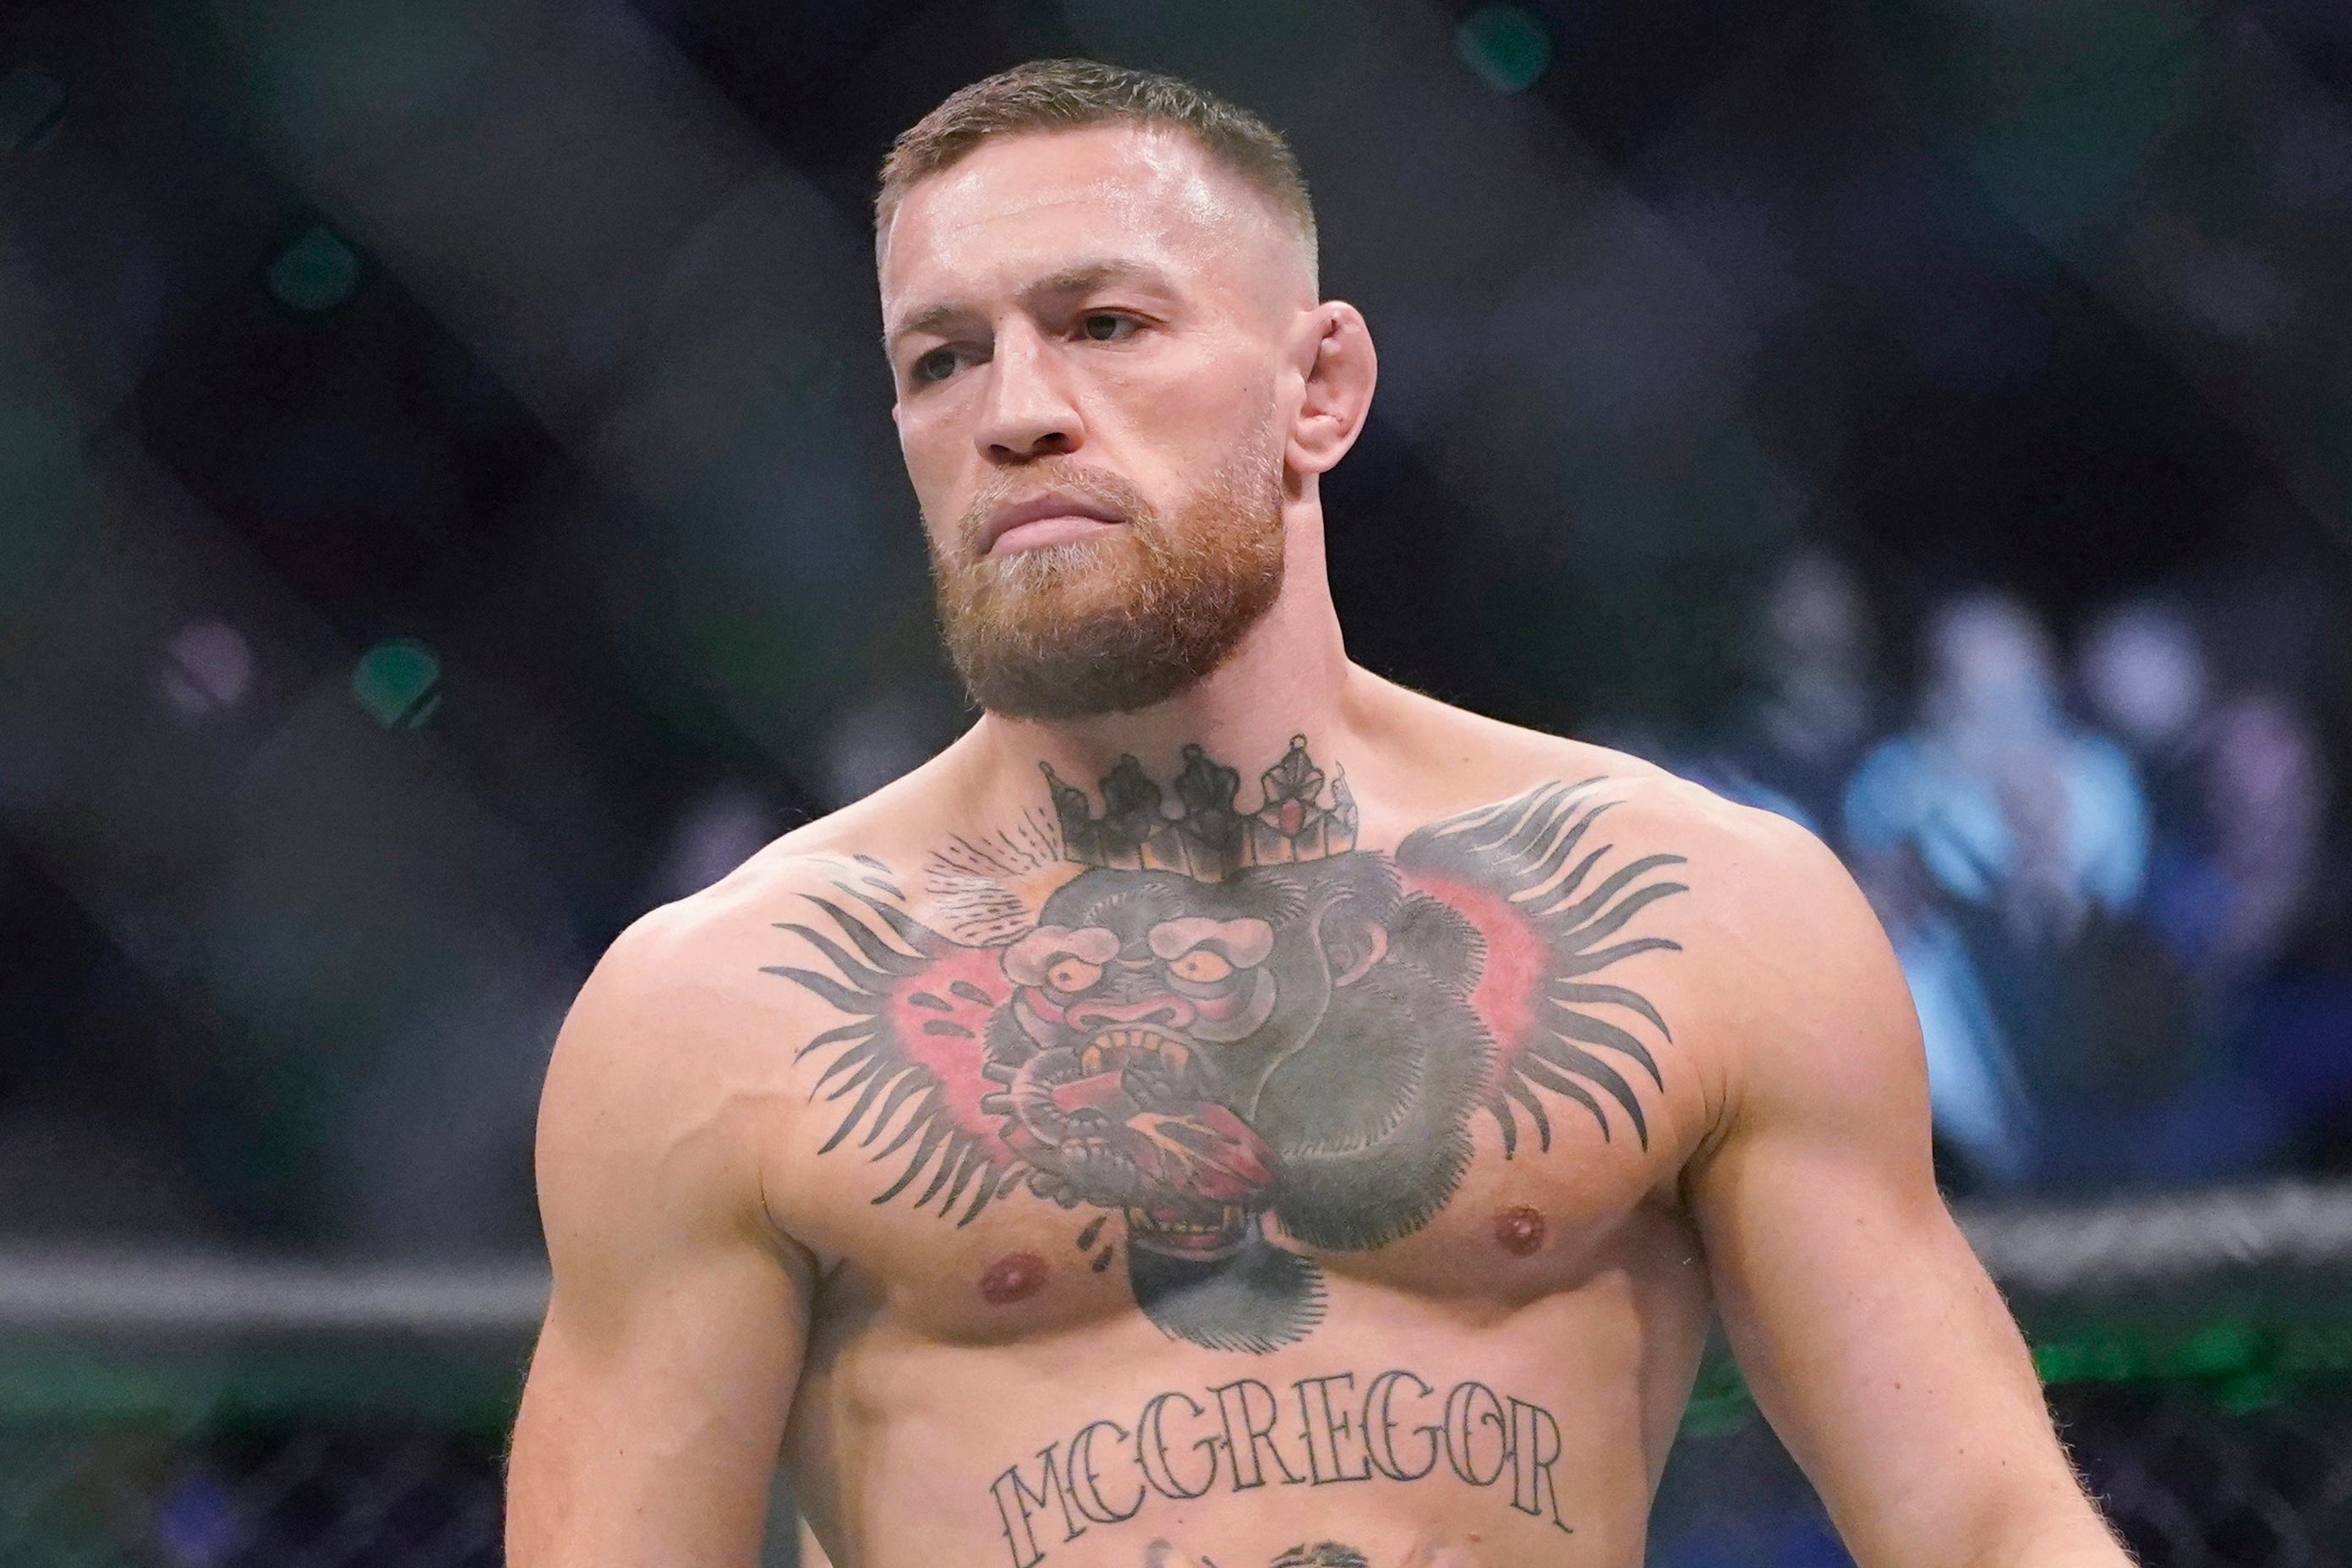 McGregor last fought in July 2021, breaking his leg in a second straight loss to Dustin Poirier